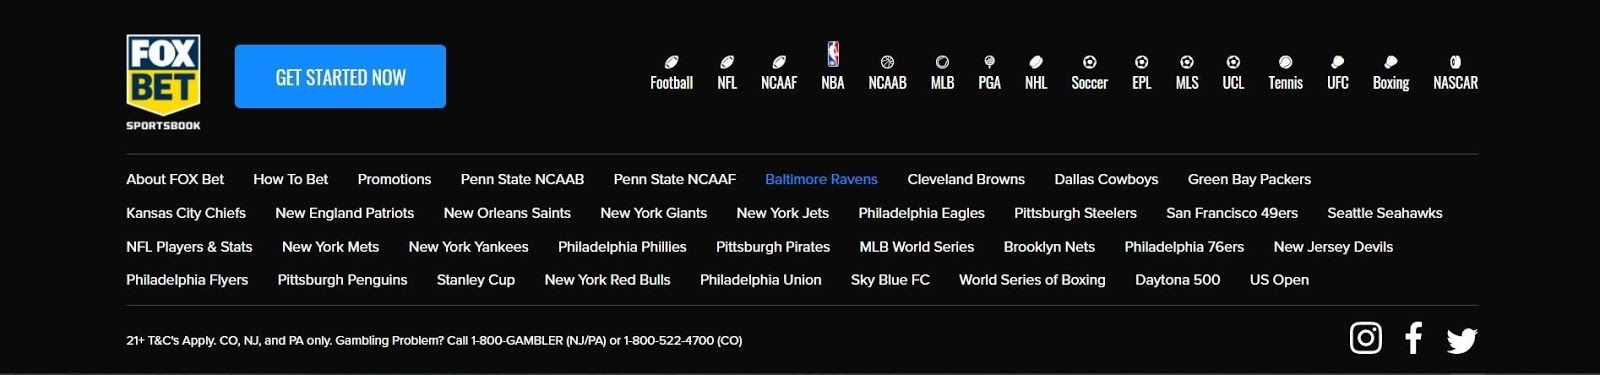 Fox Bet Website listing affiliated clubs